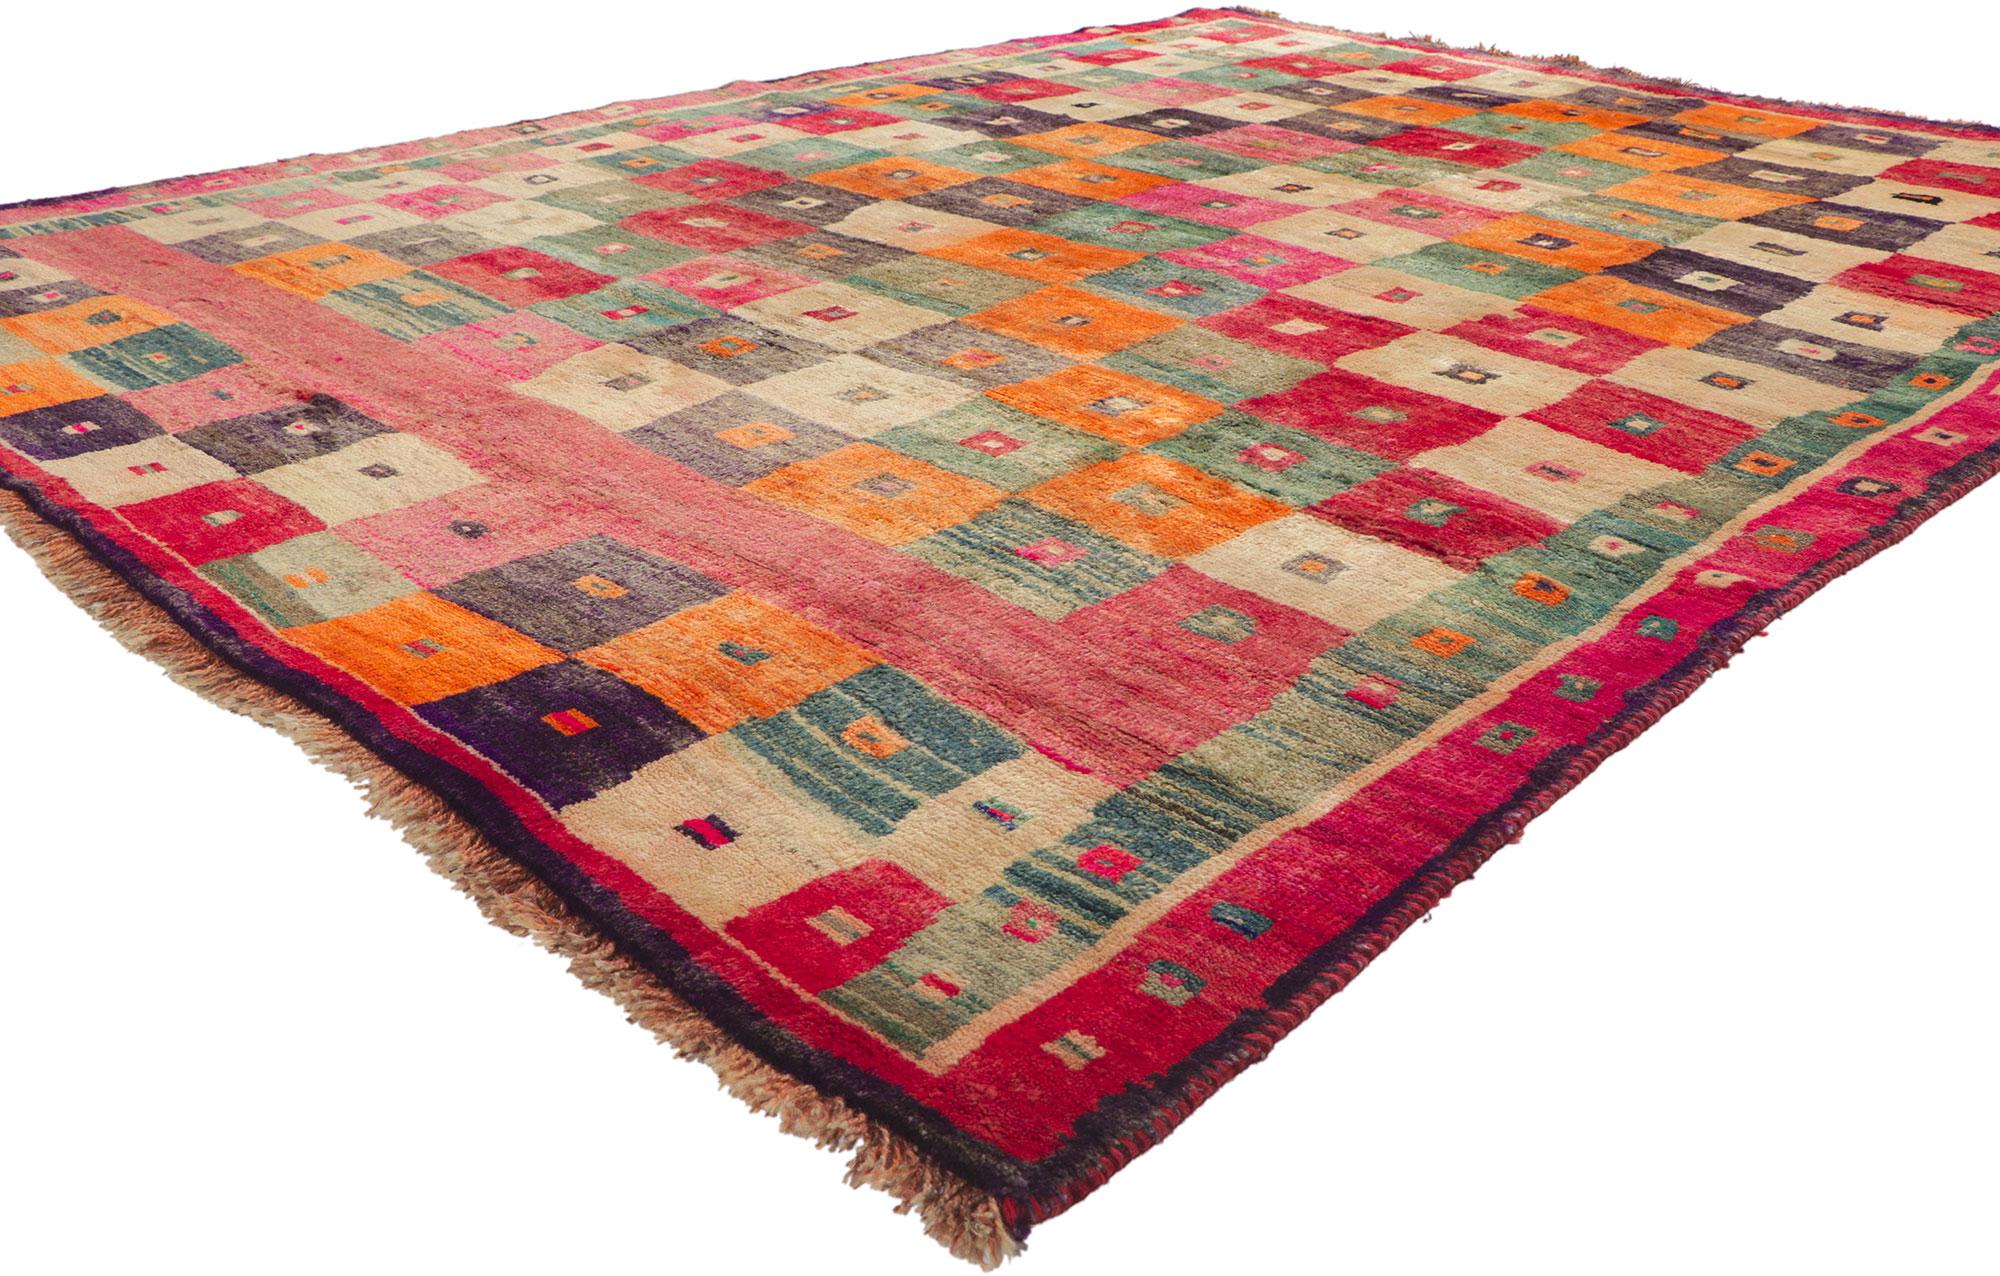 61165 Vintage Persian Gabbeh rug with Checkered Pattern Inspired by Karl Benjamin 06'05 x 08'05. With its checkerboard design, incredible detail and texture, this hand knotted wool vintage Persian Gabbeh rug is a captivating vision of woven beauty.